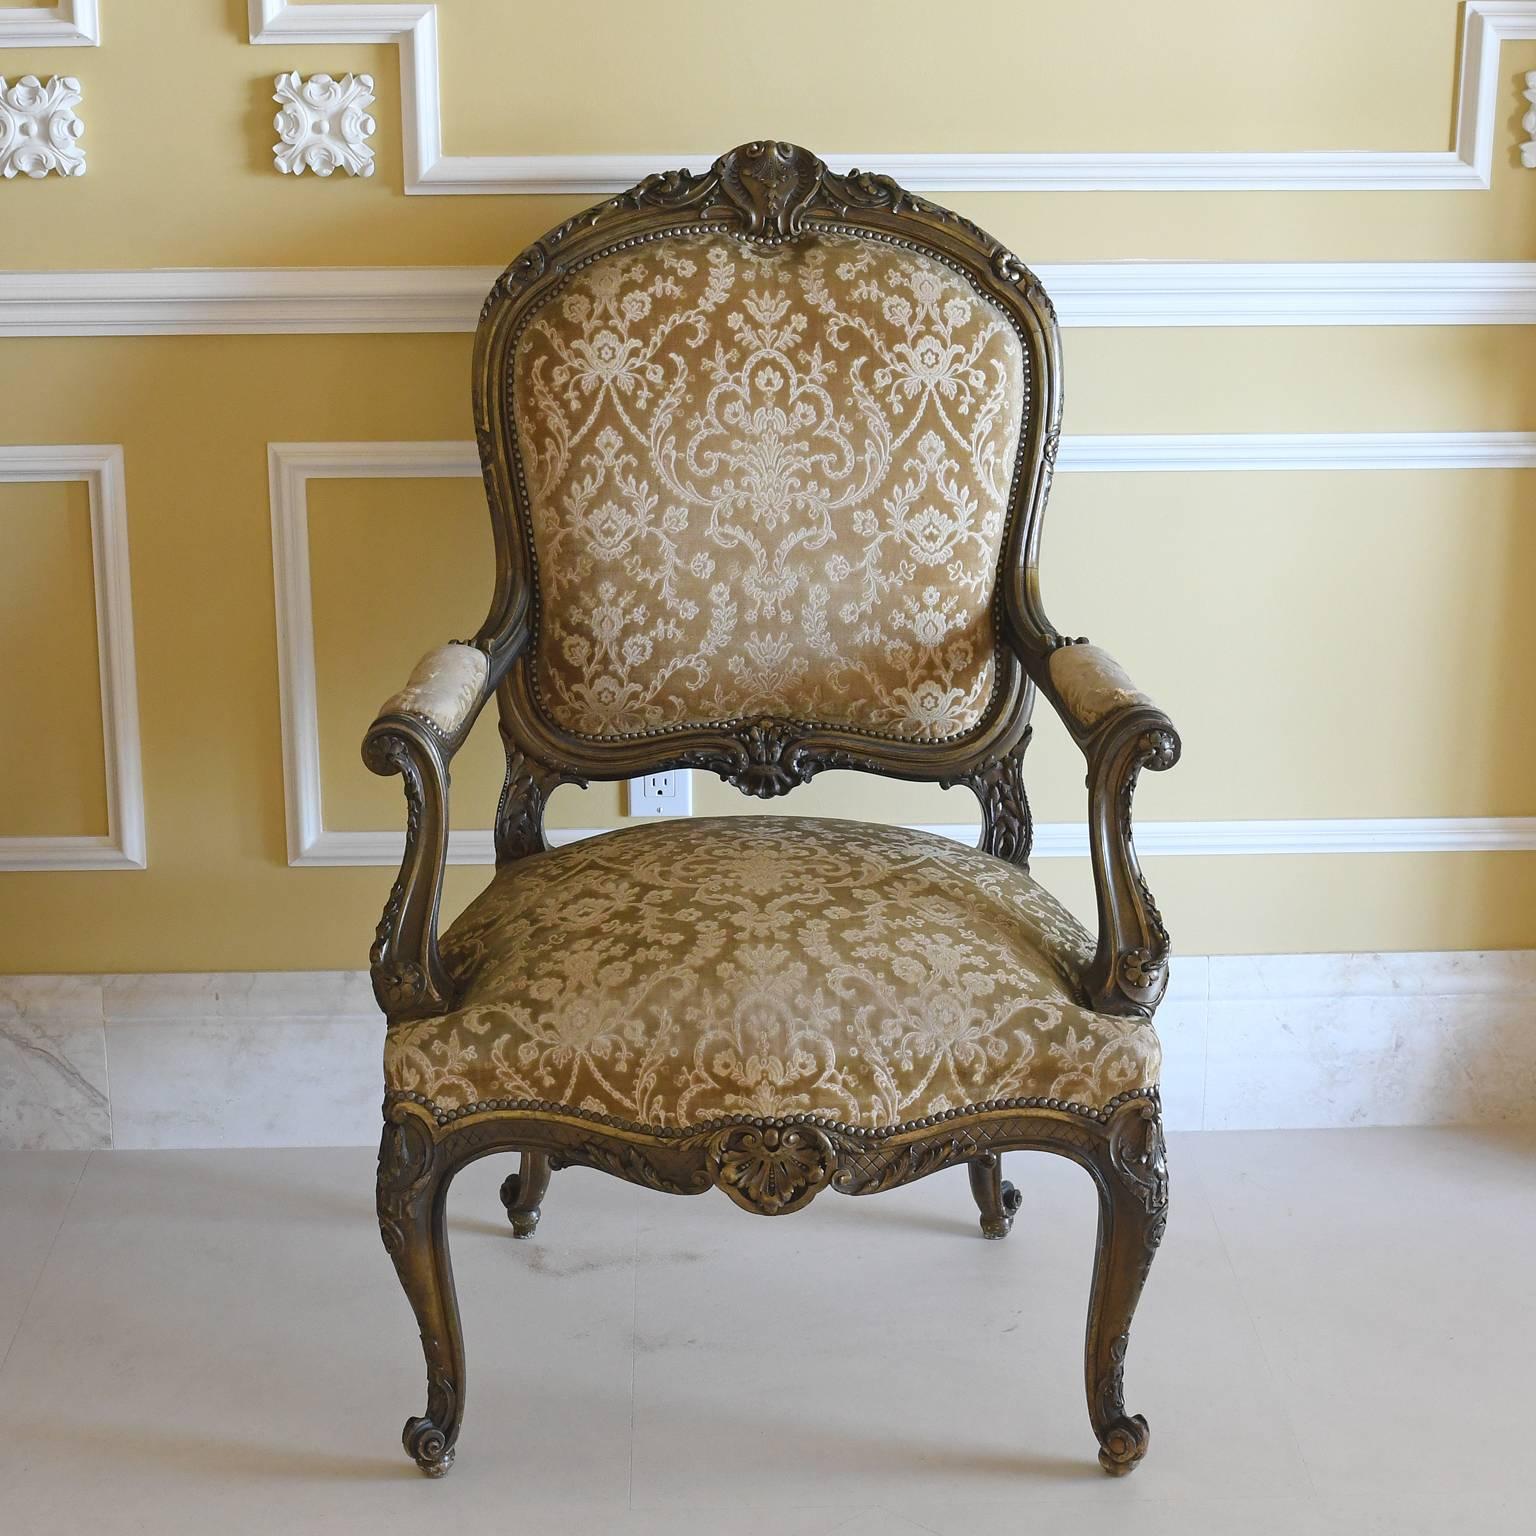 A pair of late Napoleon III fauteuils or armchairs in a hardwood with a burnished gold overtone. In the Louis XV style, chair frames offer carved cabriole legs with escargot feet, scroll arms and carvings on center crest and bottom rail of back and